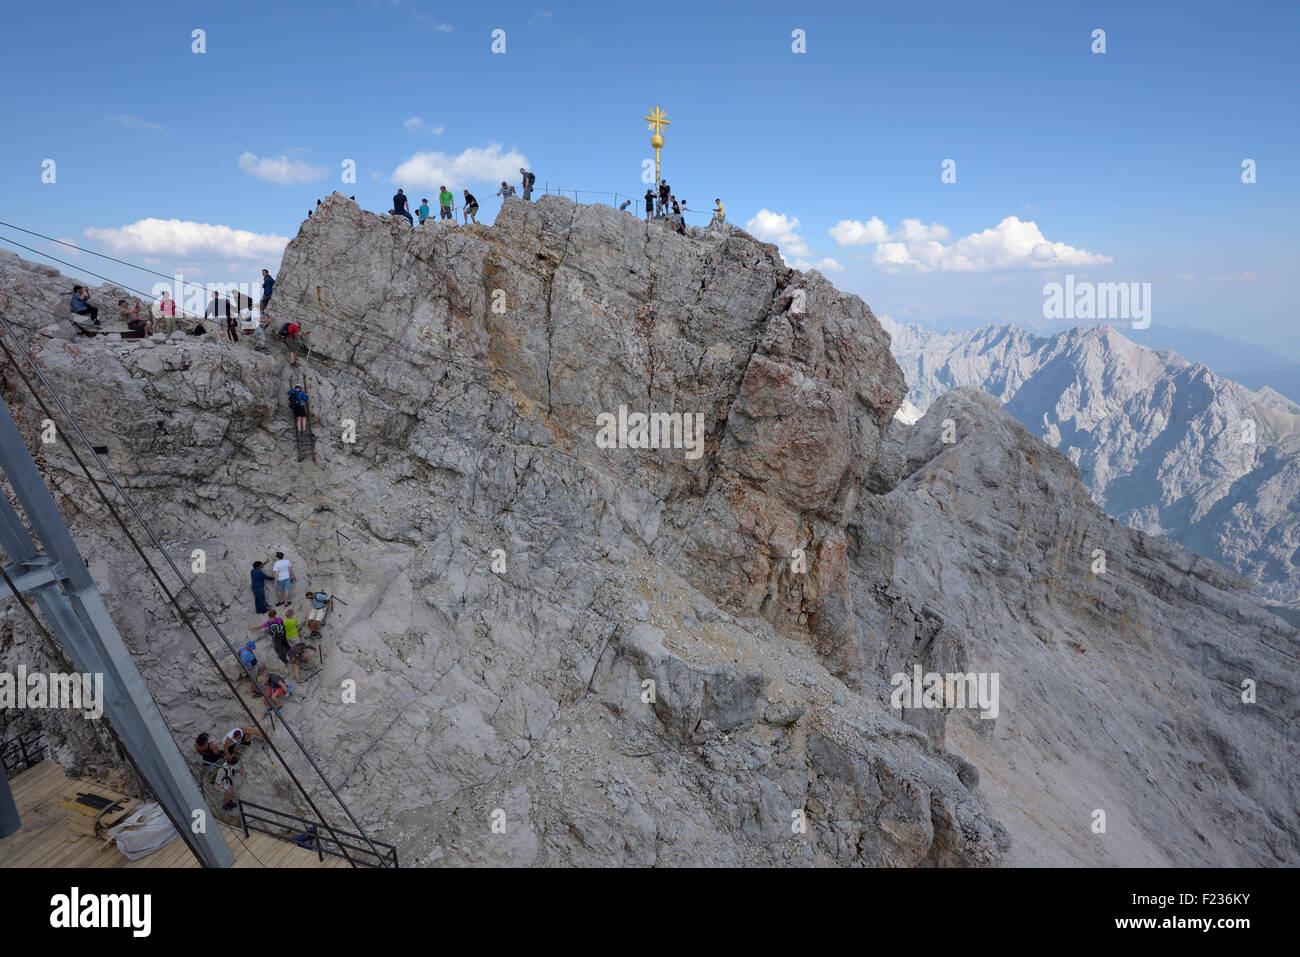 summit of Germanys highest mountain Zugspitze with the golden summit cross and crowded with people, Germany Stock Photo